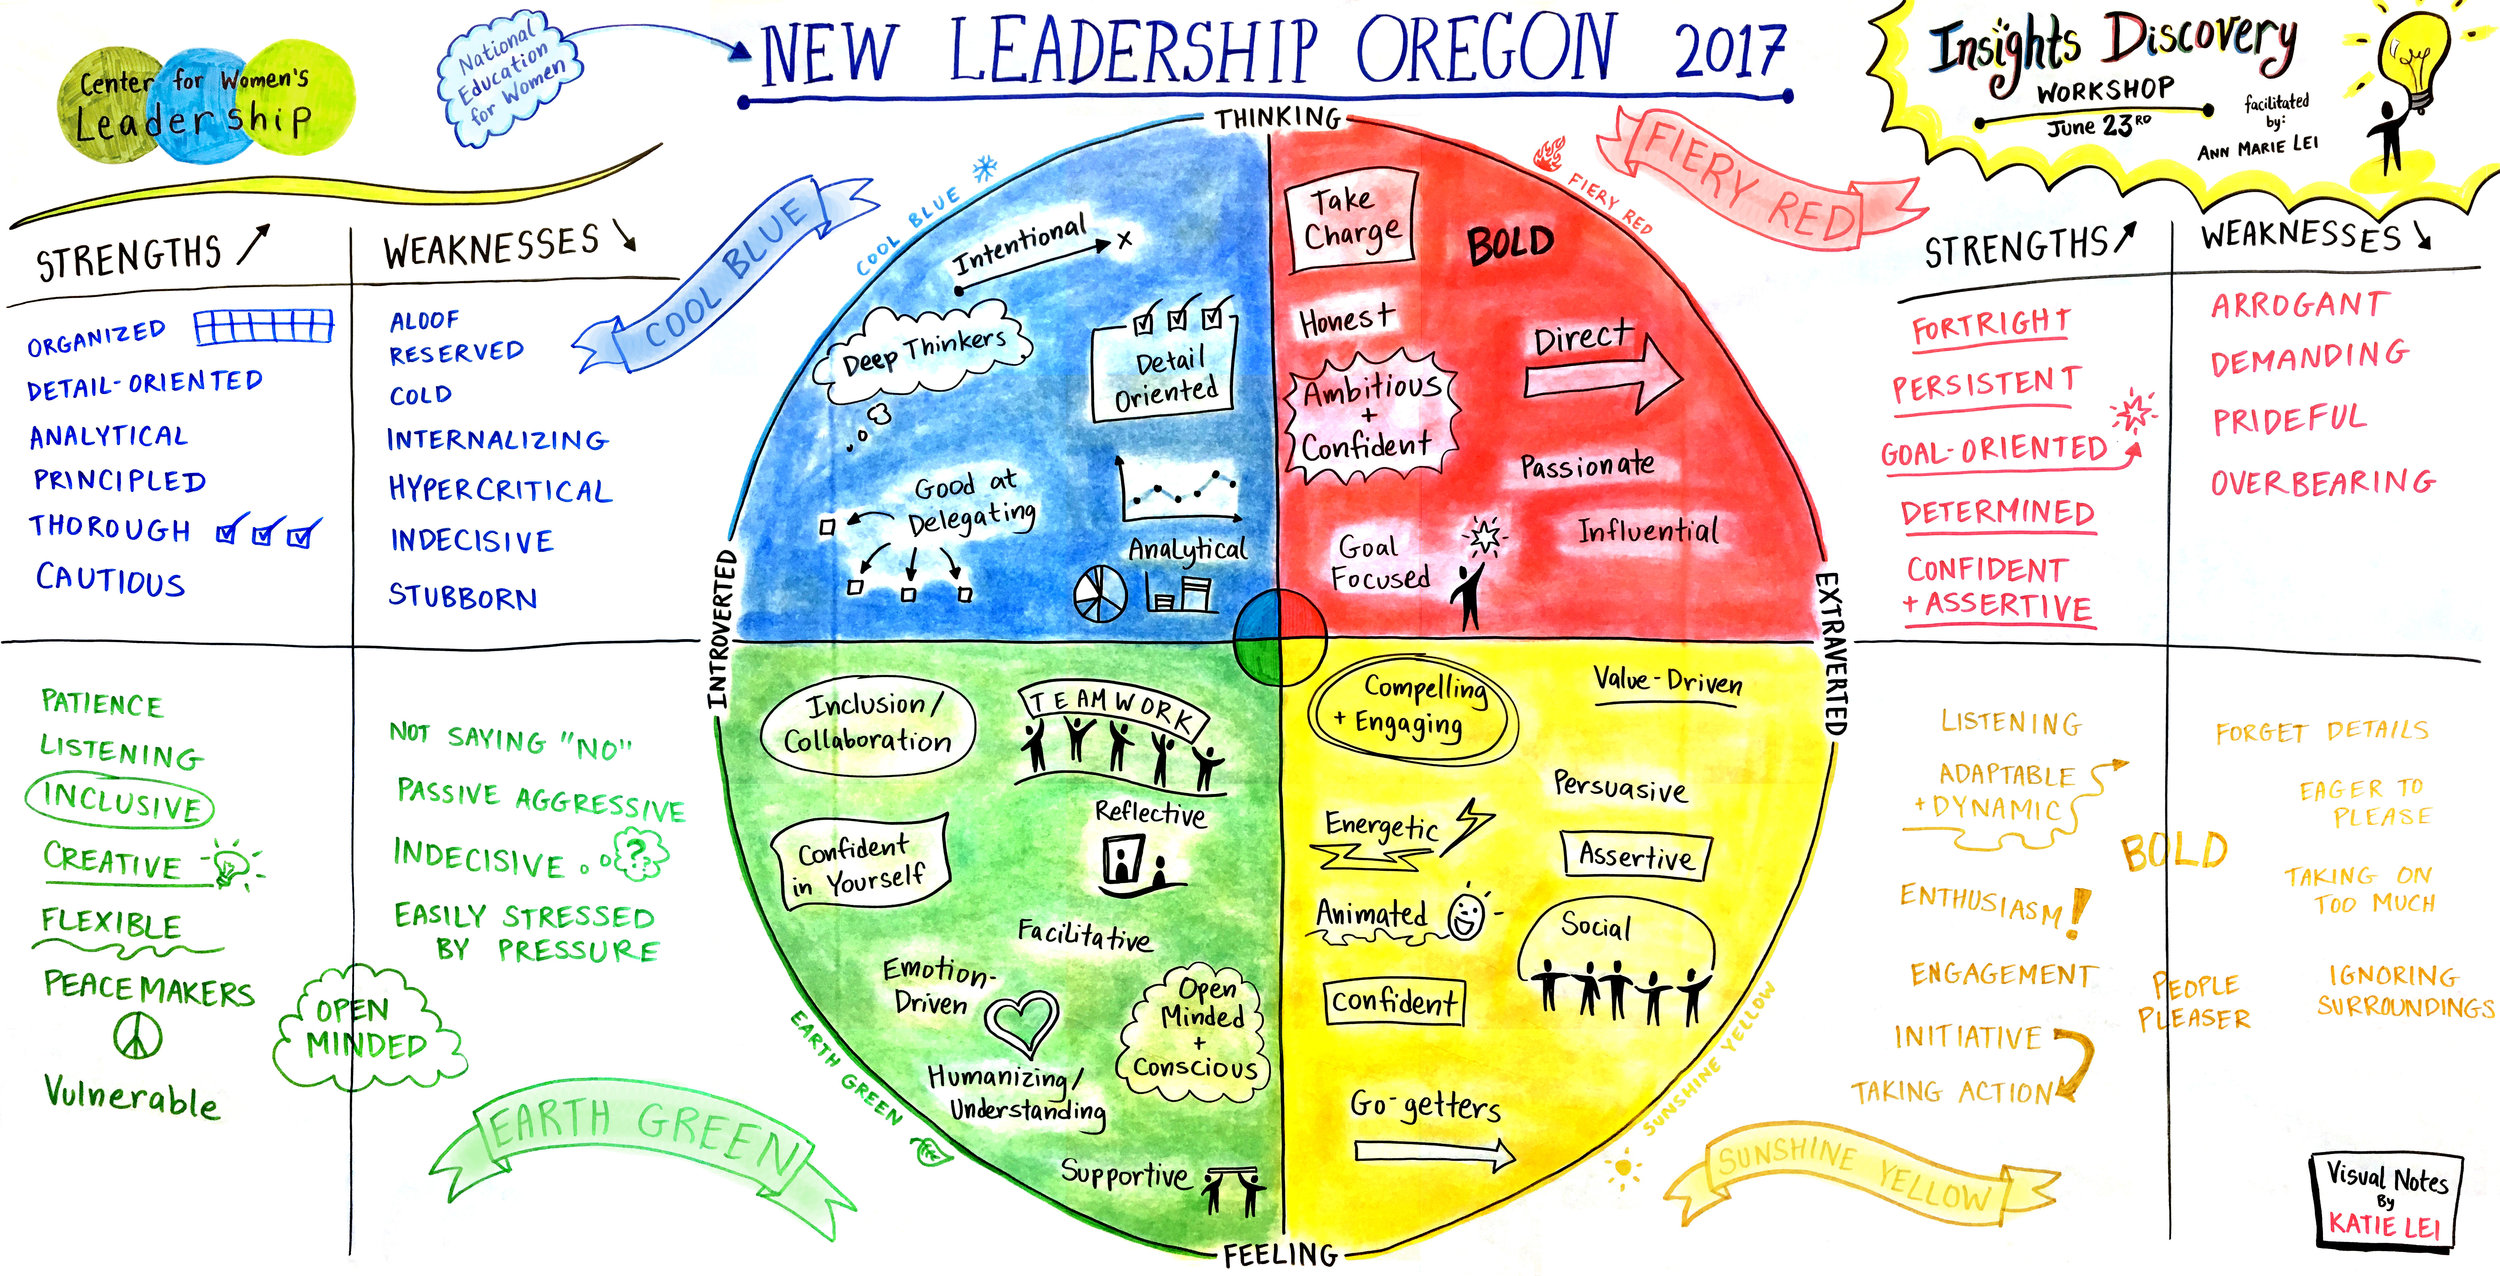 Visual Notes by Katie Lei for NEW Leadership Oregon